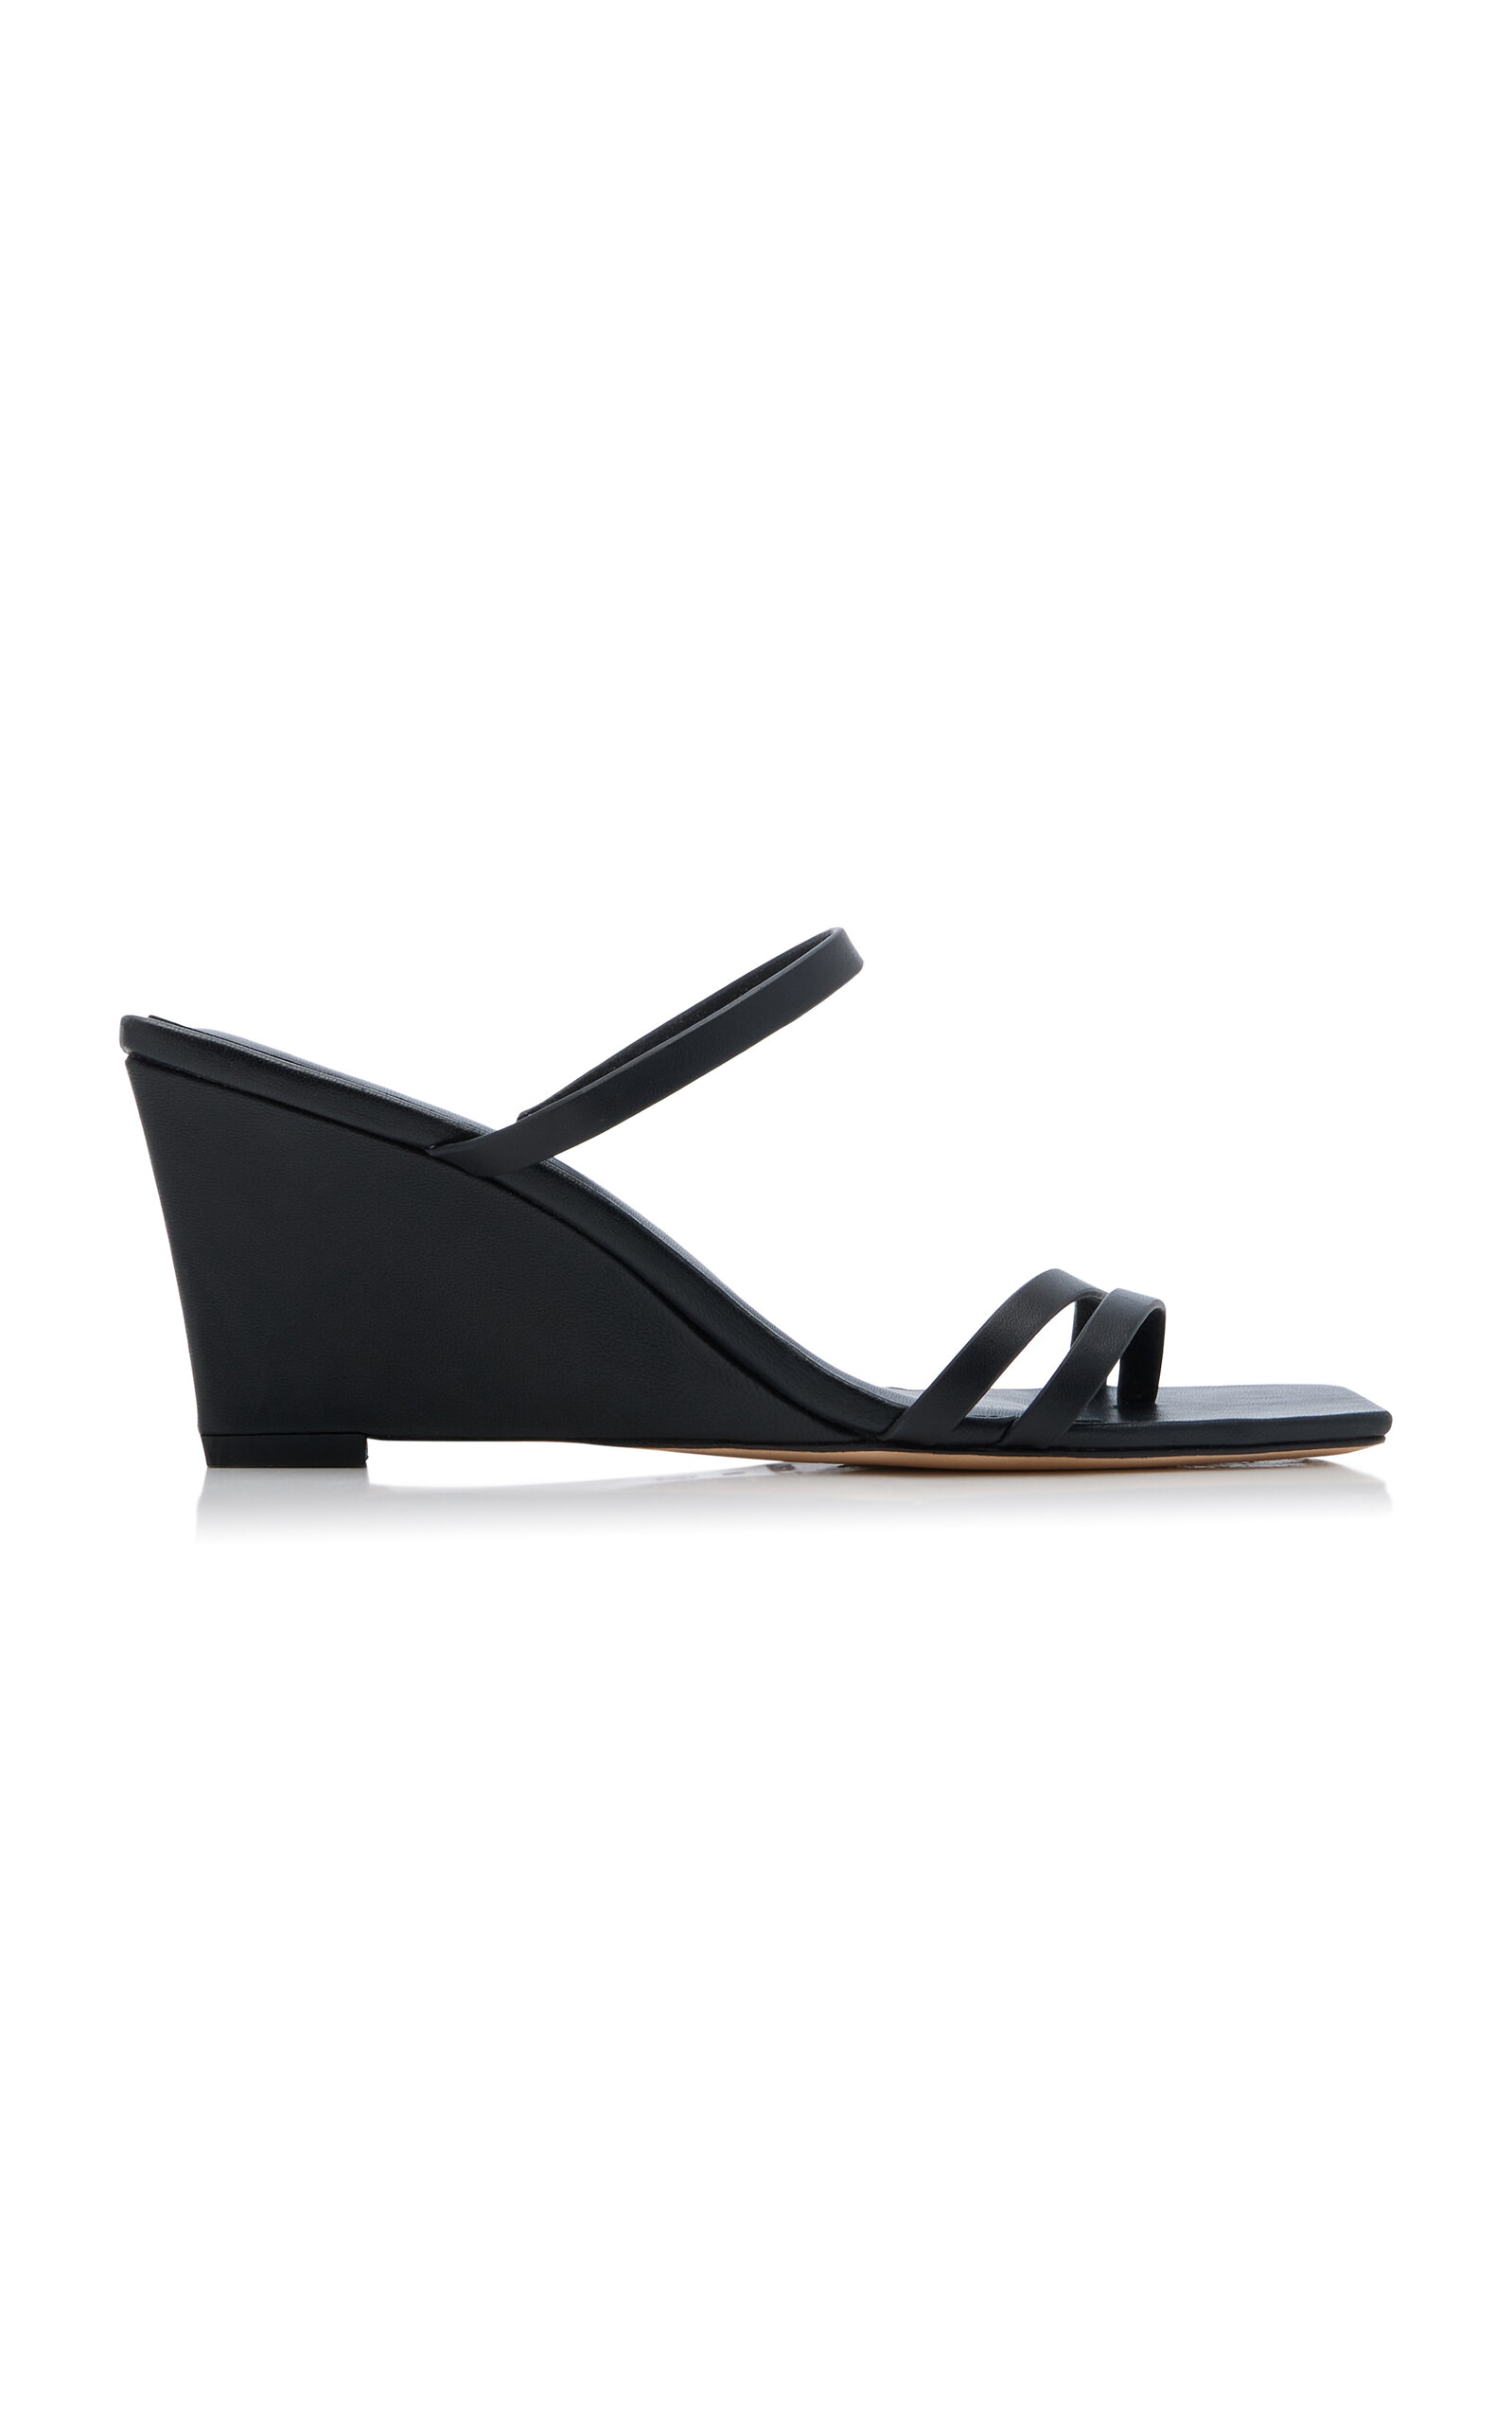 ST AGNI LEATHER WEDGE SANDALS